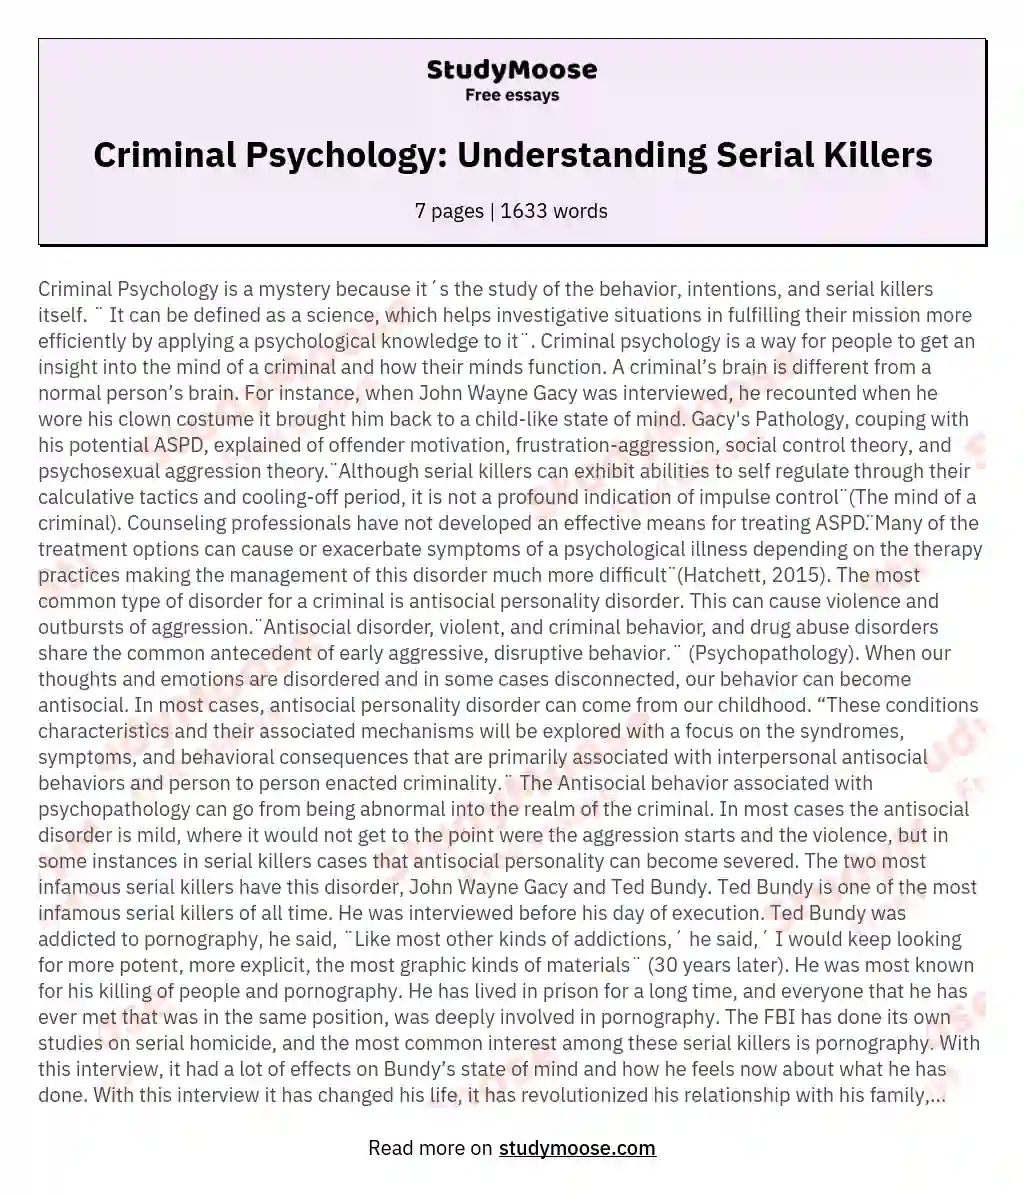 Criminal Psychology: Study of the Behavior, Intentions, and Serial Killers Itself